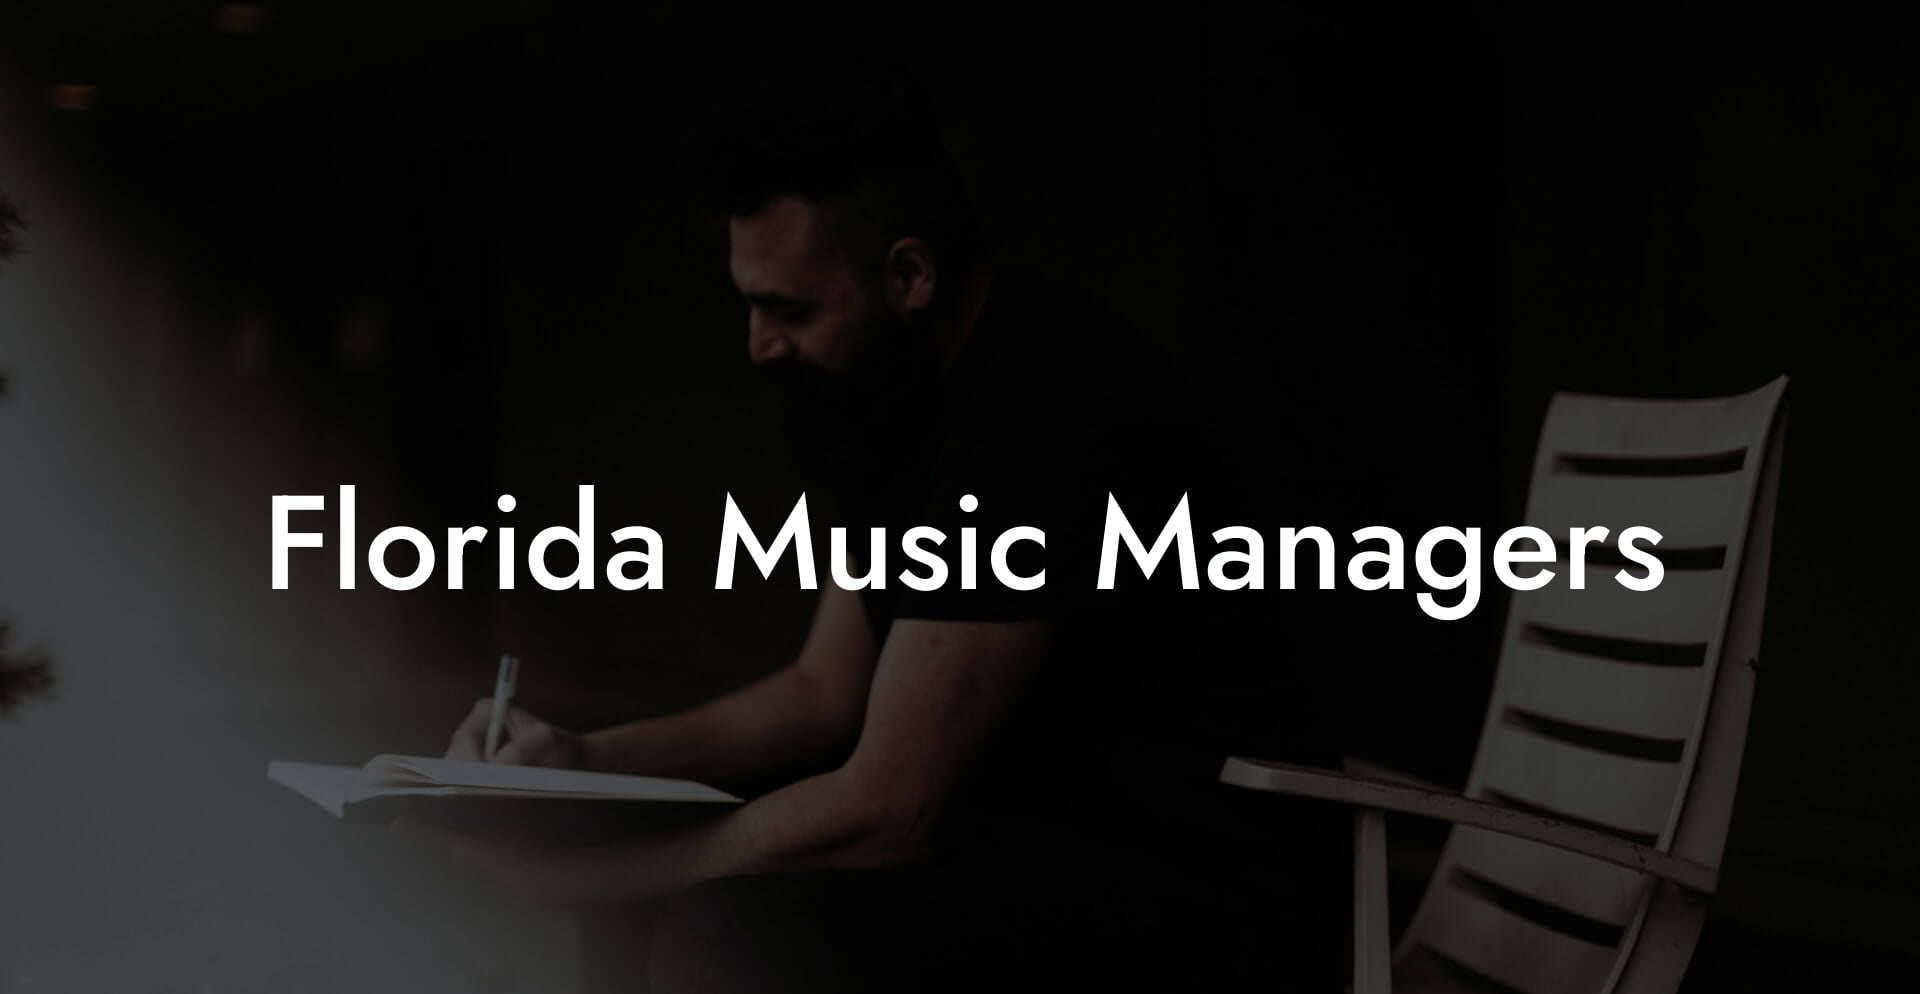 Florida Music Managers